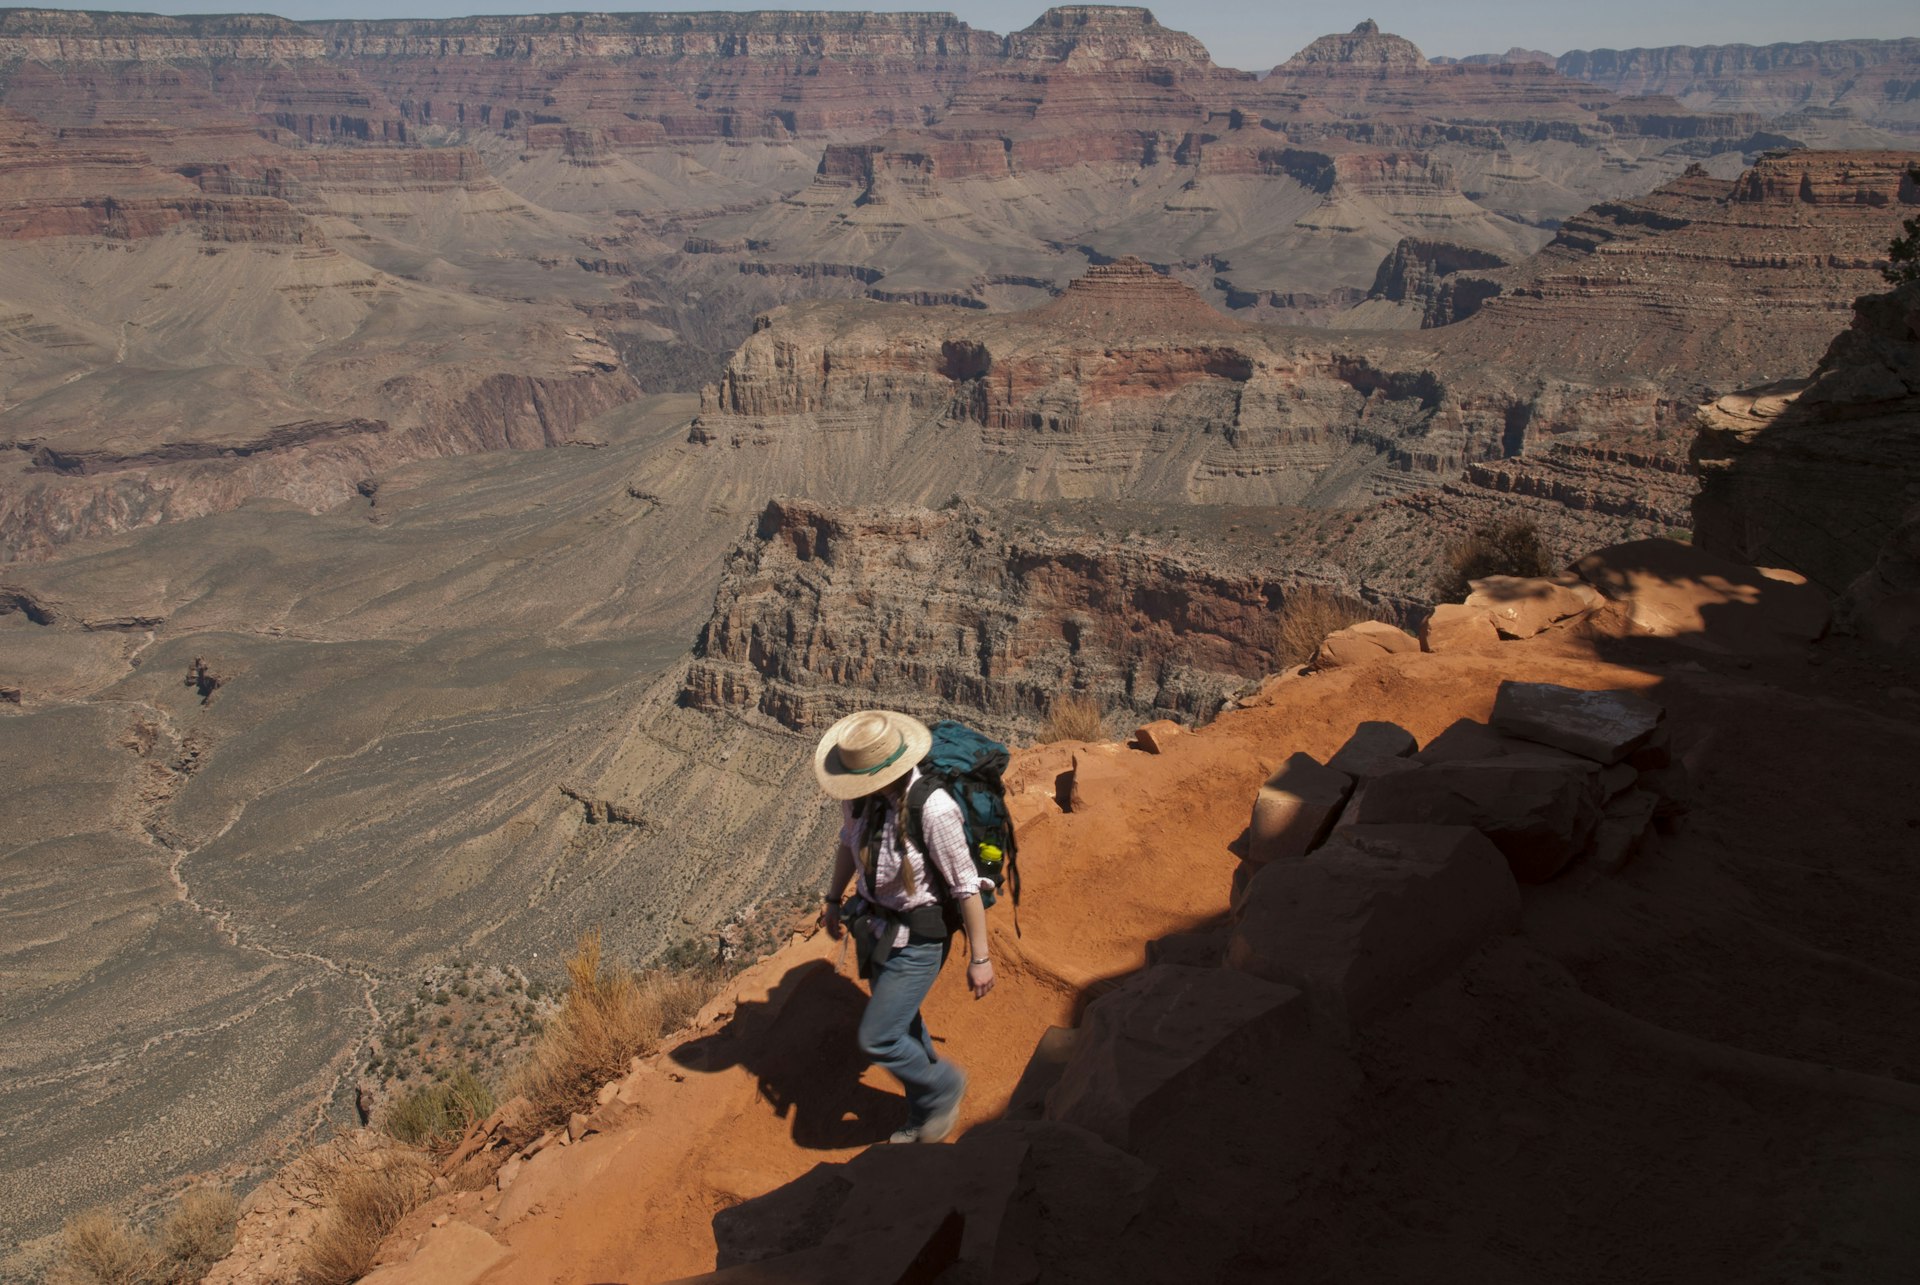 Woman hiking the Grand Canyons Kaibab Trail on the South Rim of the Grand Canyon National Park. rizona, Nature, Mountain, Adults Only, Women, Mid Adult, Cliff, Physical Geography, Arid Climate, One Mid Adult Woman Only, South Rim, Grand Canyon National Park, Hat, Arizona, Extreme Terrain, Tranquility, Landscape, Outdoors, High Angle View, Color Image, Desert, People, Landscape - Scenery, USA, Hiking, Southwest USA, Tasm